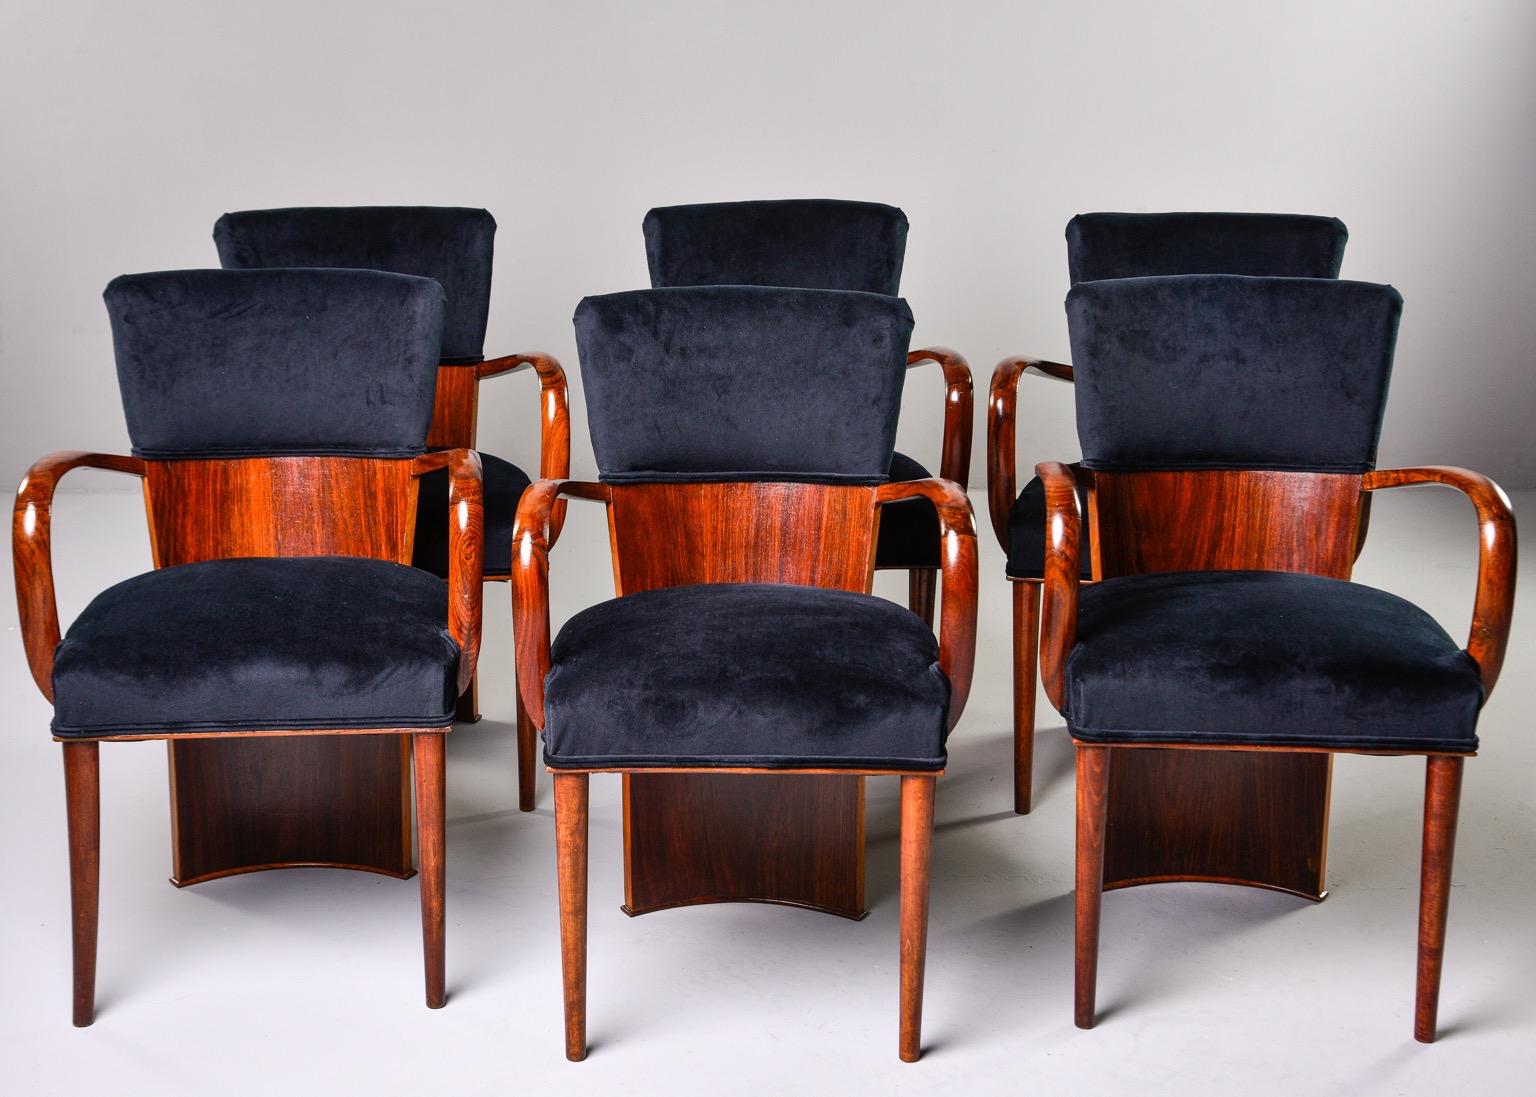 Set of six circa 1930s Italian Art Deco chairs with dramatic amboyna wood backs that extend to the floor. Chairs have tapered legs, curved armrests and padded seats and back rests that are newly upholstered in a short napped black cotton velvet.